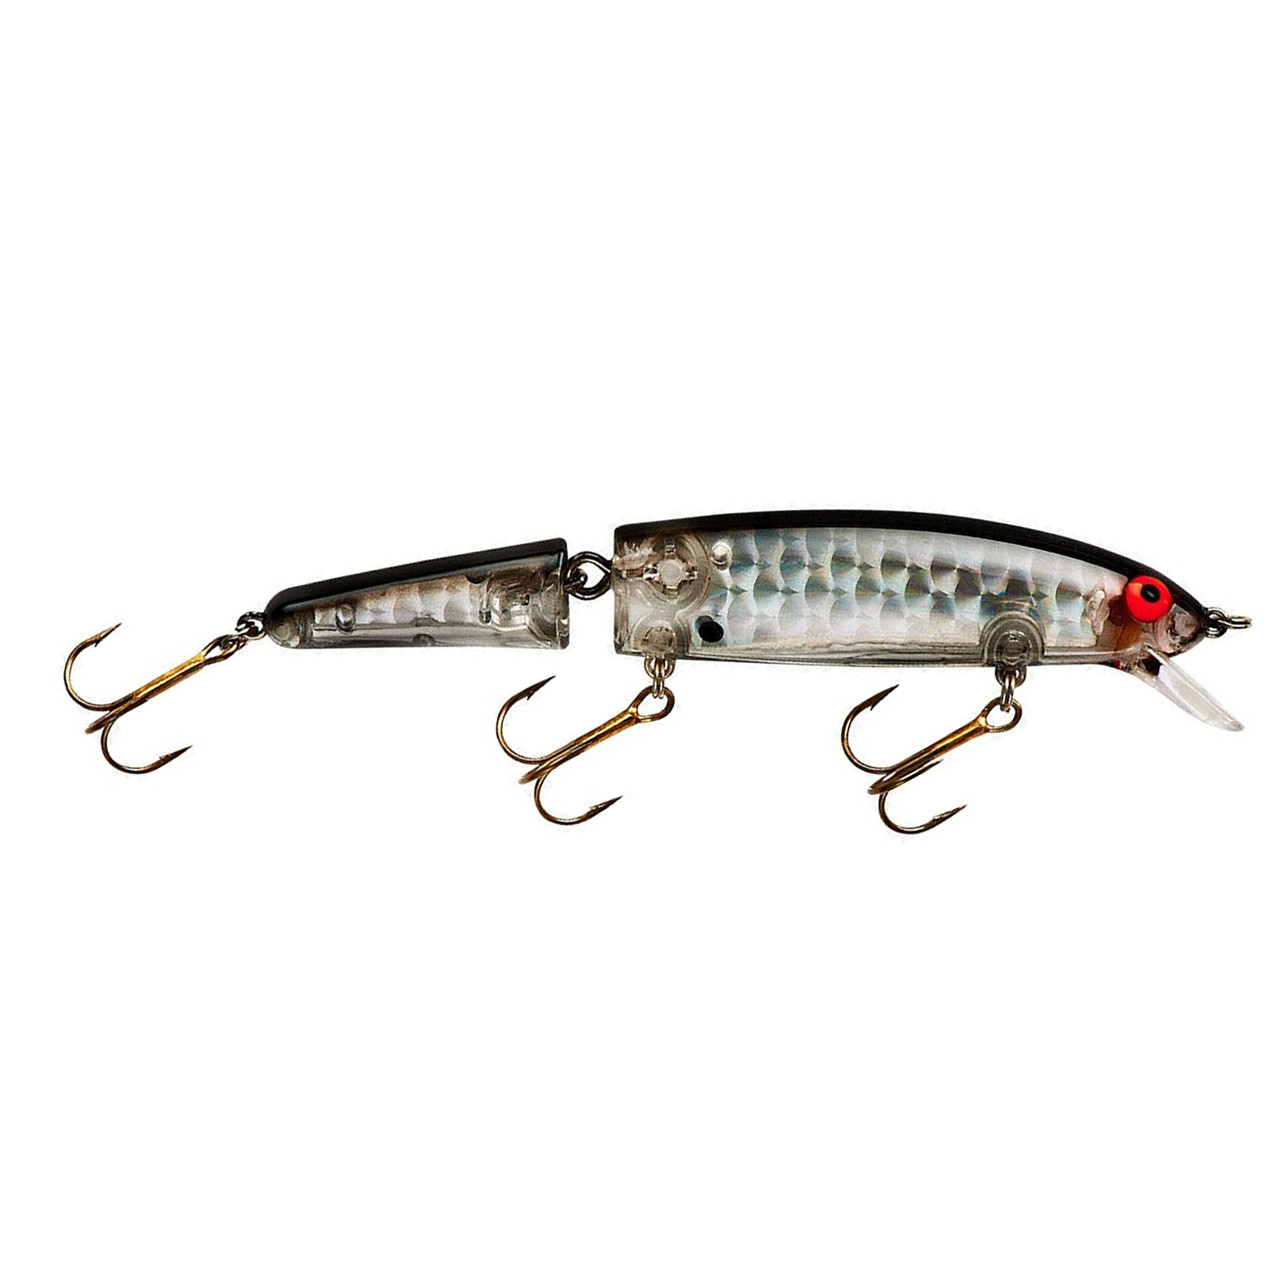 Bomber Lures Long A Slender Minnow Jerbait Fishing Lure Jointed Long a B15j  Slender Minnow Silver Flash Red Head